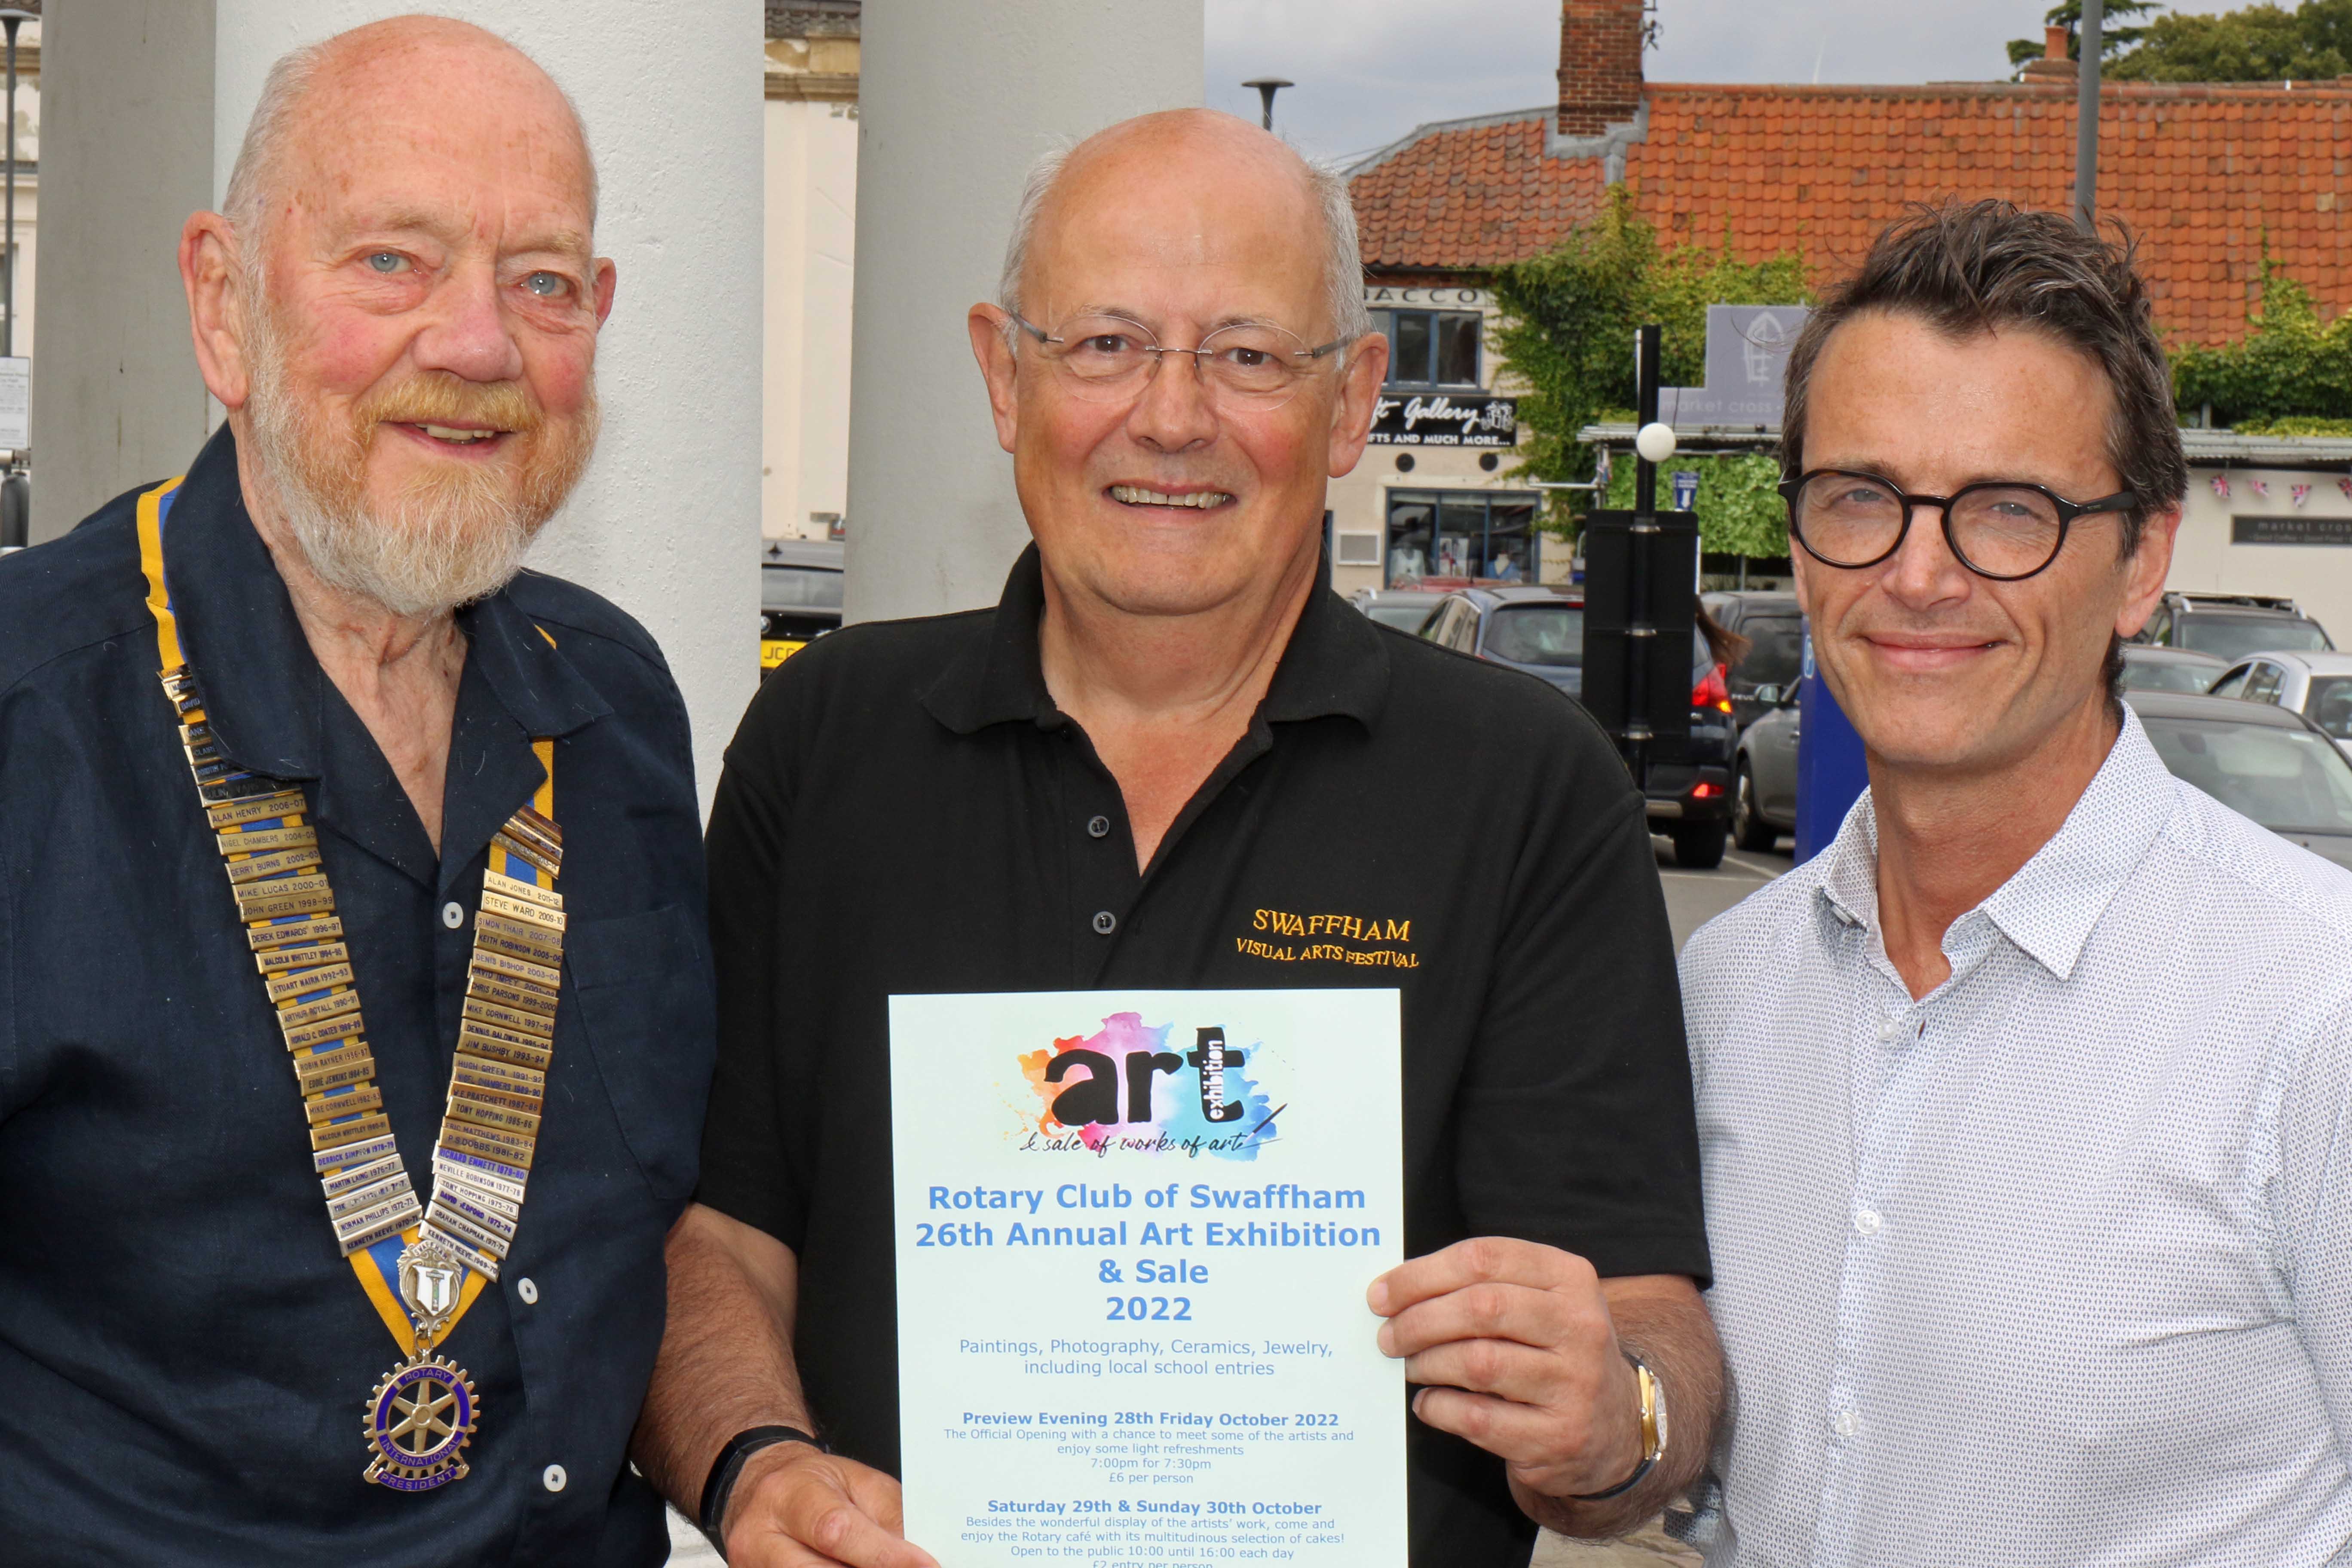 Tickets Go On Sale For Exclusive Preview Evening For Swaffham’s Annual Art Exhibition